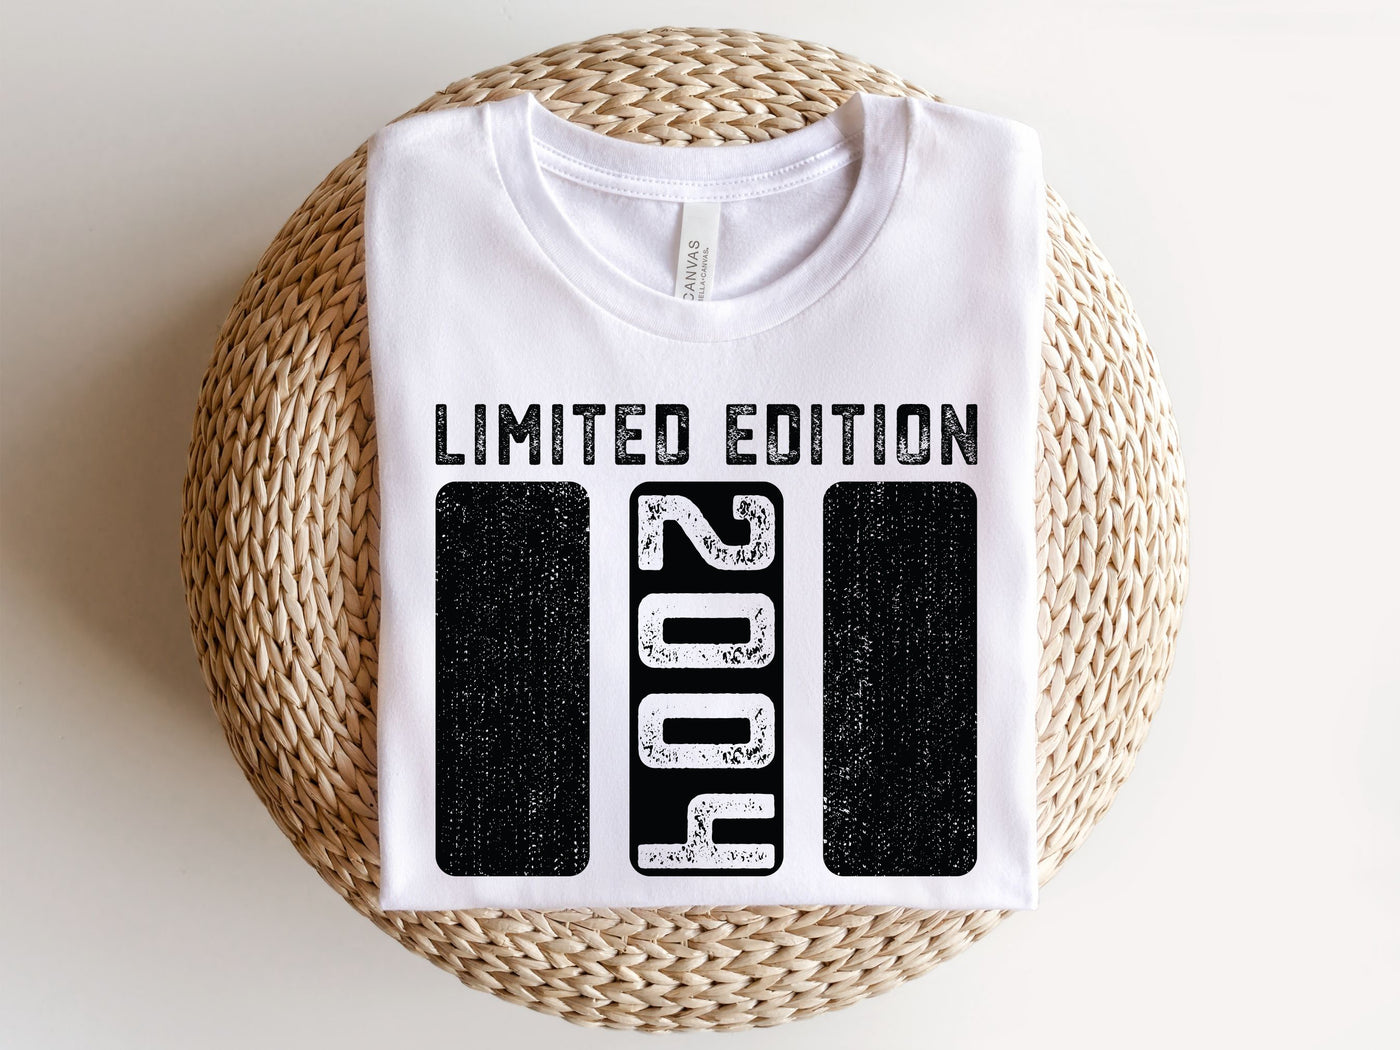 Limited Edition 2004 2